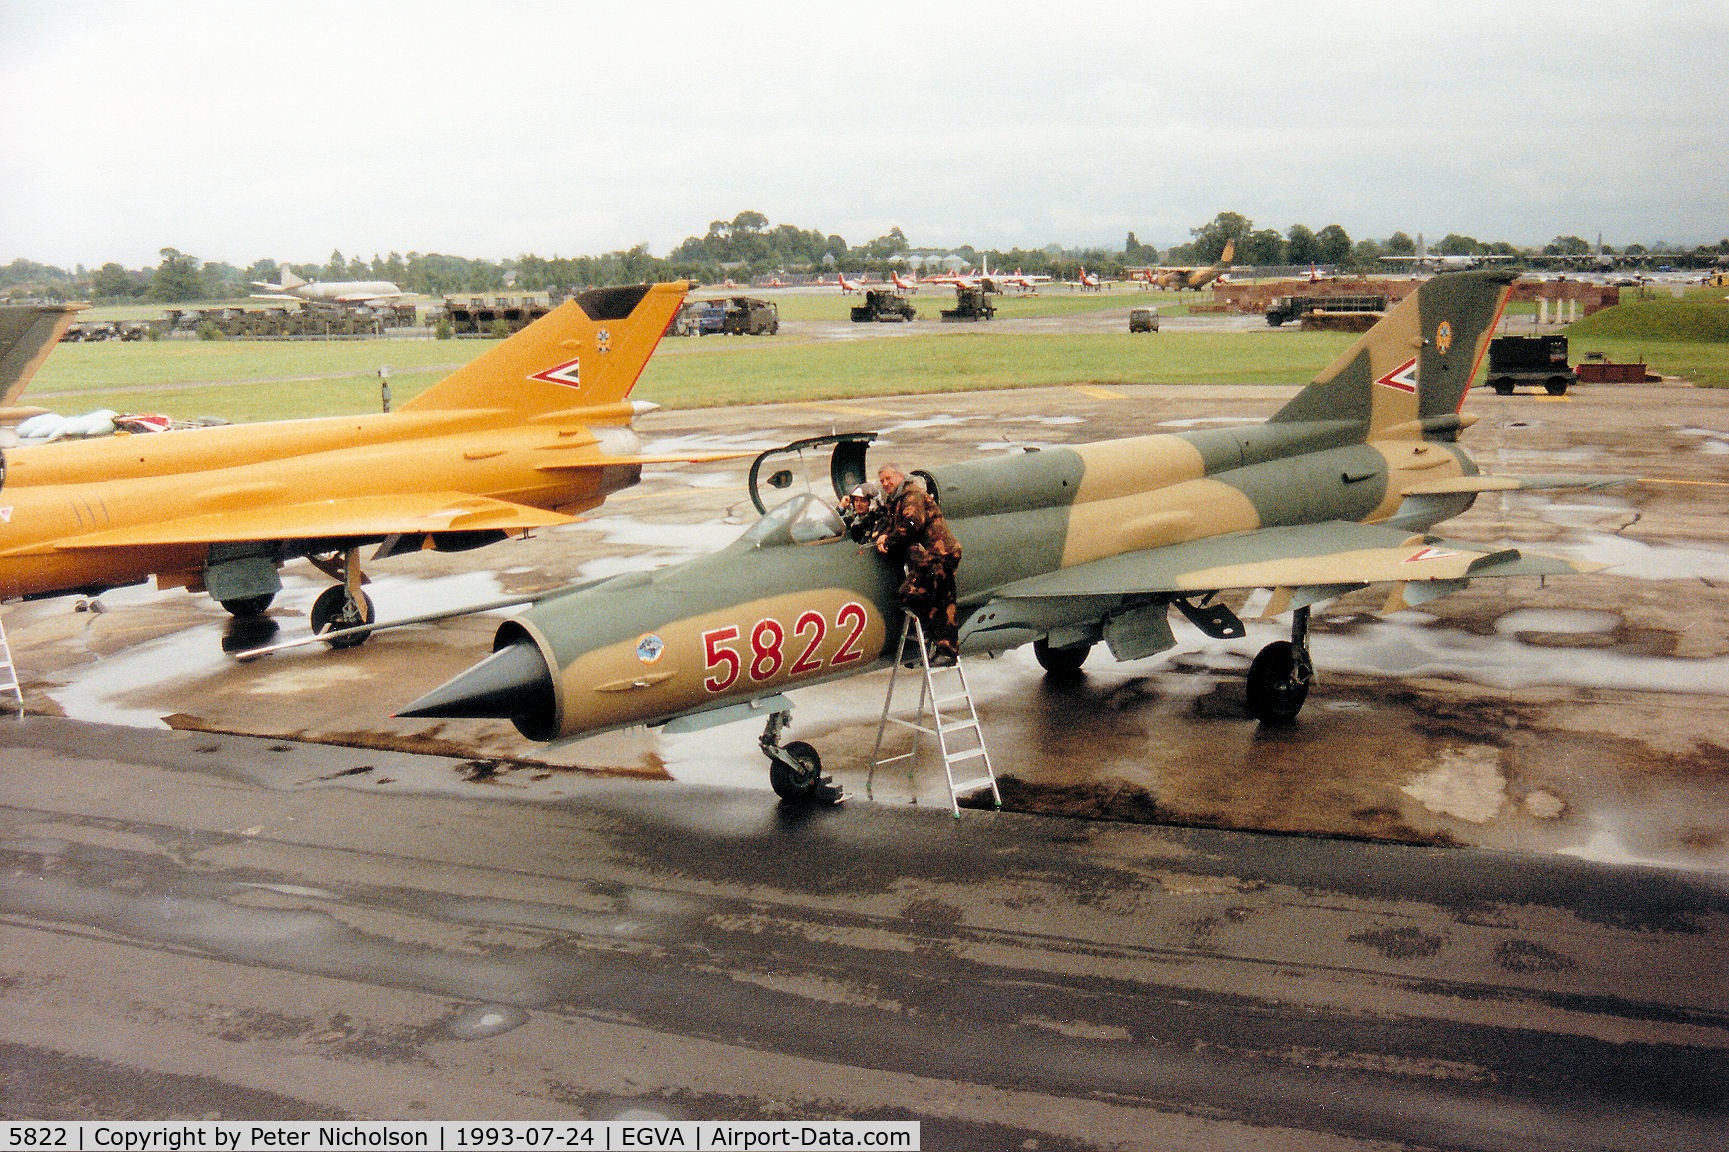 5822, Mikoyan-Gurevich MiG-21bis C/N 75035822, MiG-21 Fishbed of the Sky Hussars display team on the flight-line at the 1993 Intnl Air Tattoo at RAF Fairford.